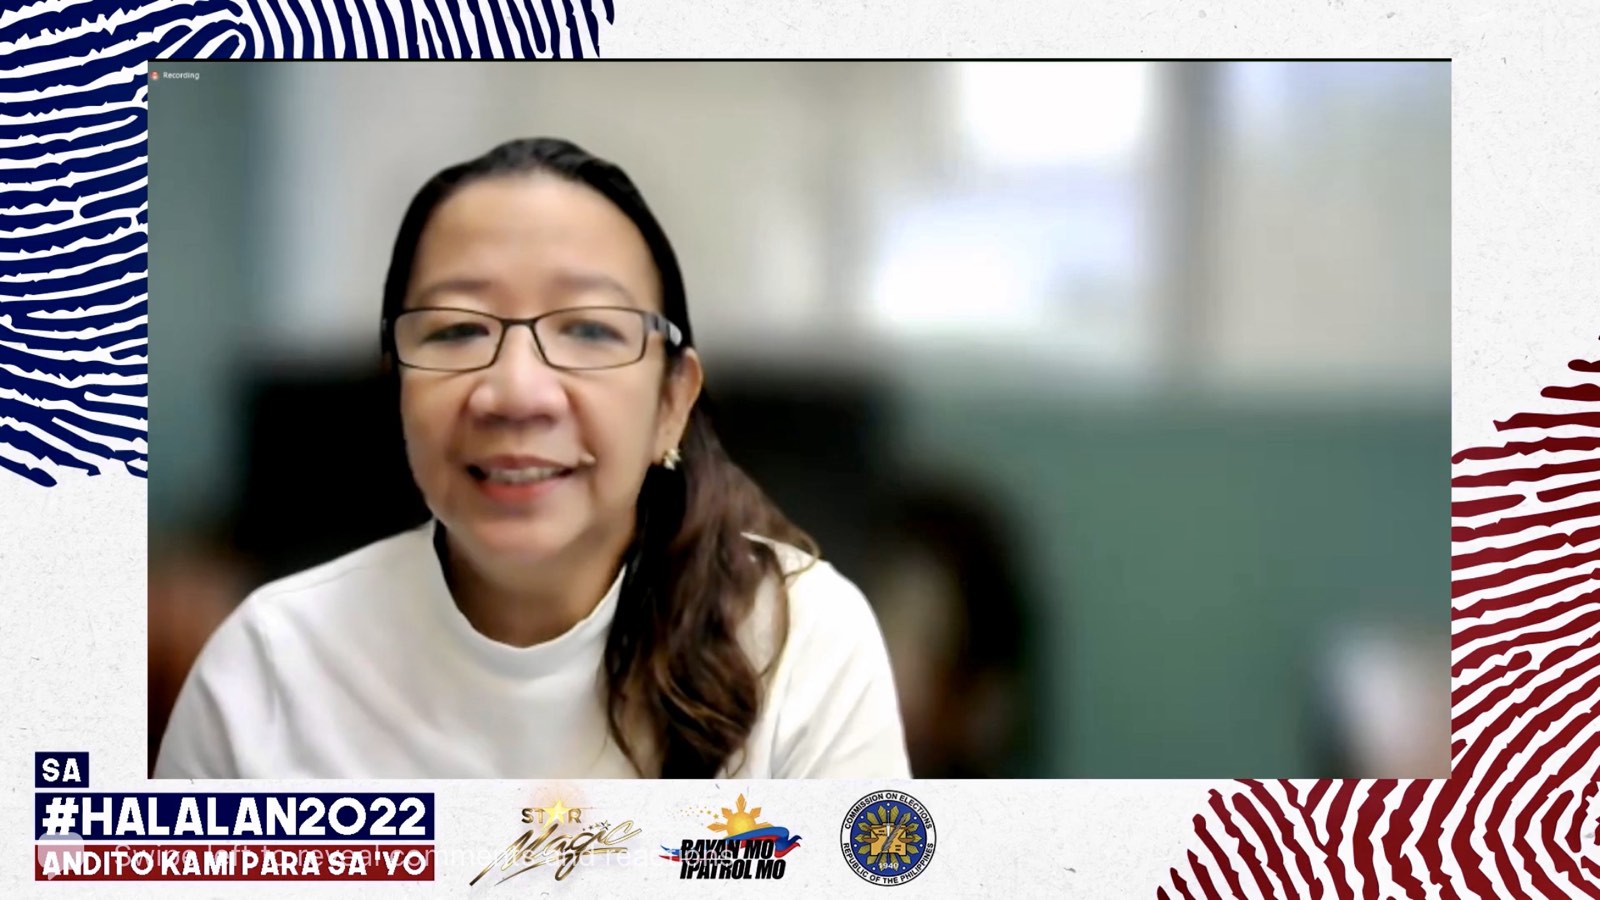 Star Magic And Bayan Mo Ipatrol Mo Join Forces To Encourage Filipinos To Register For The 2022 6776